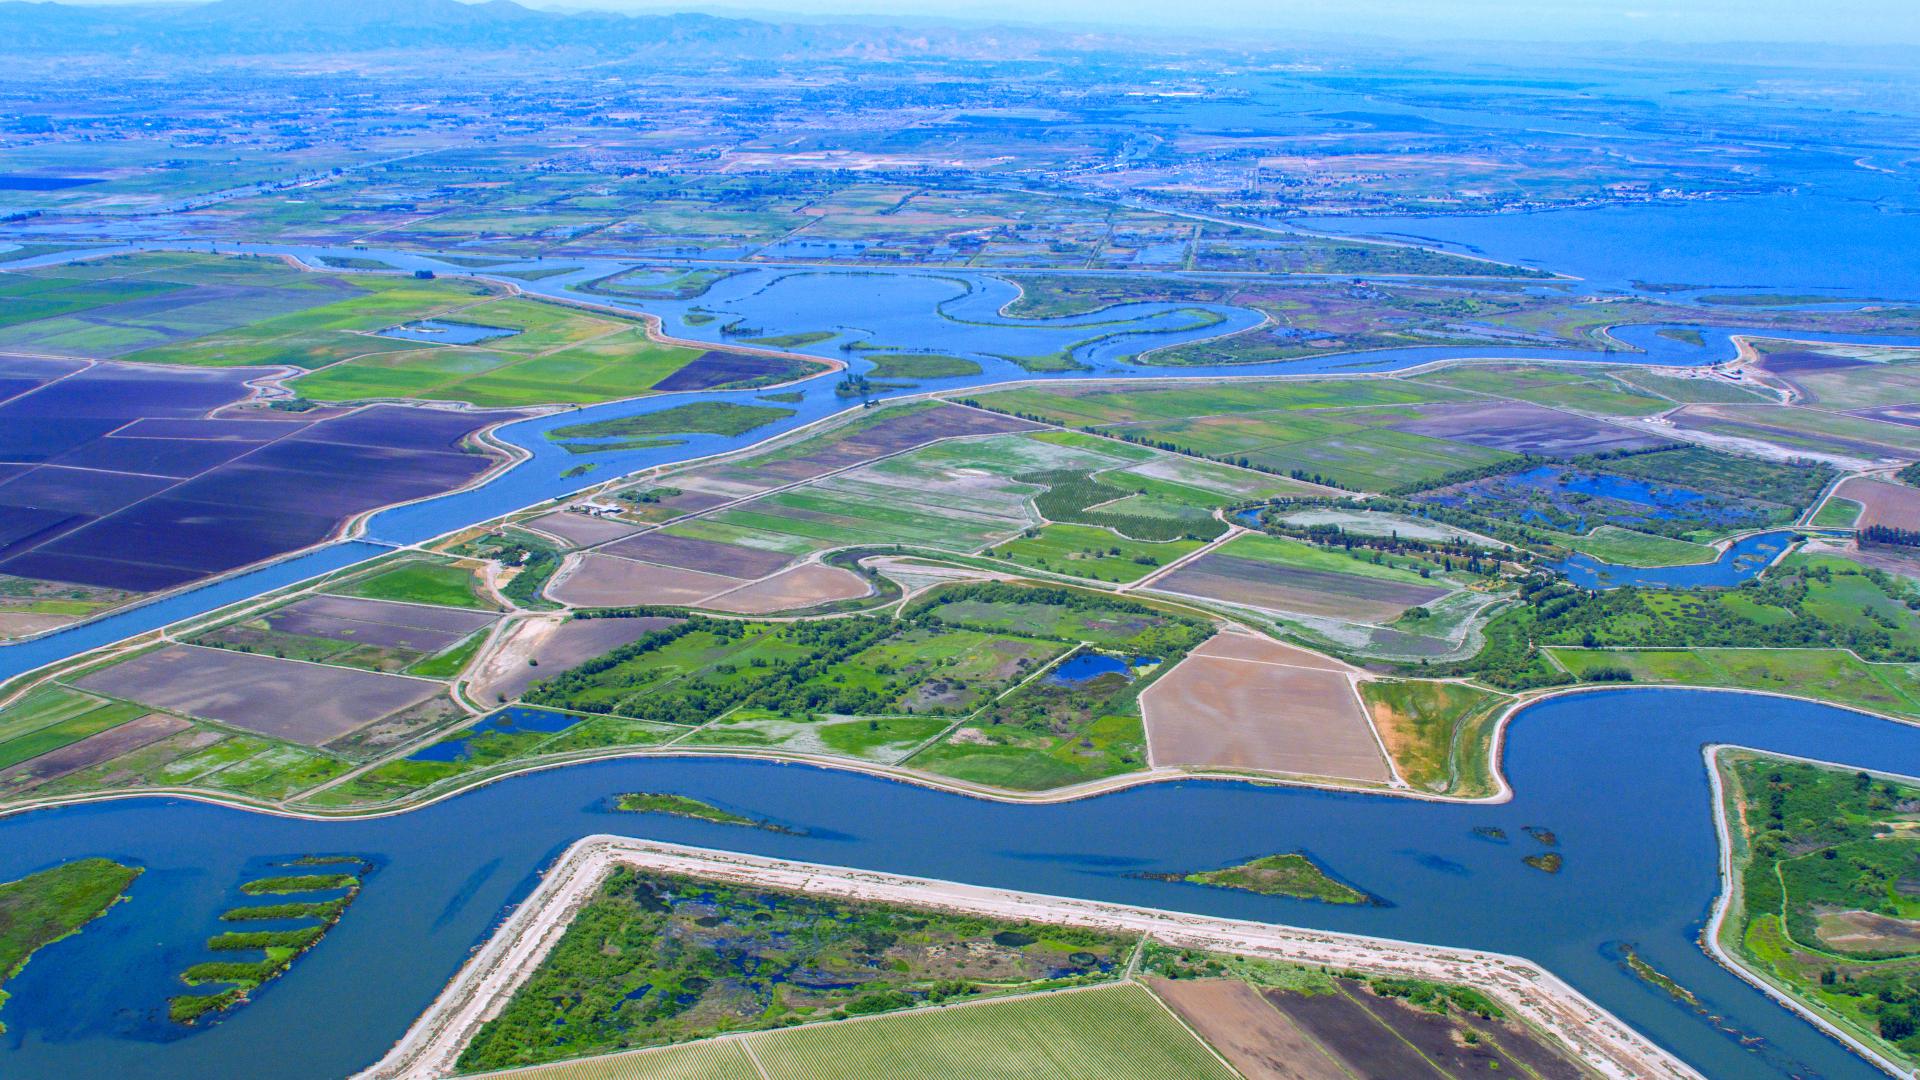 Tony Meyers of the State Water Project and Barbara Barrigan-Parrilla of Restore the Delta sat down to discuss a range of topics including the Delta tunnel.